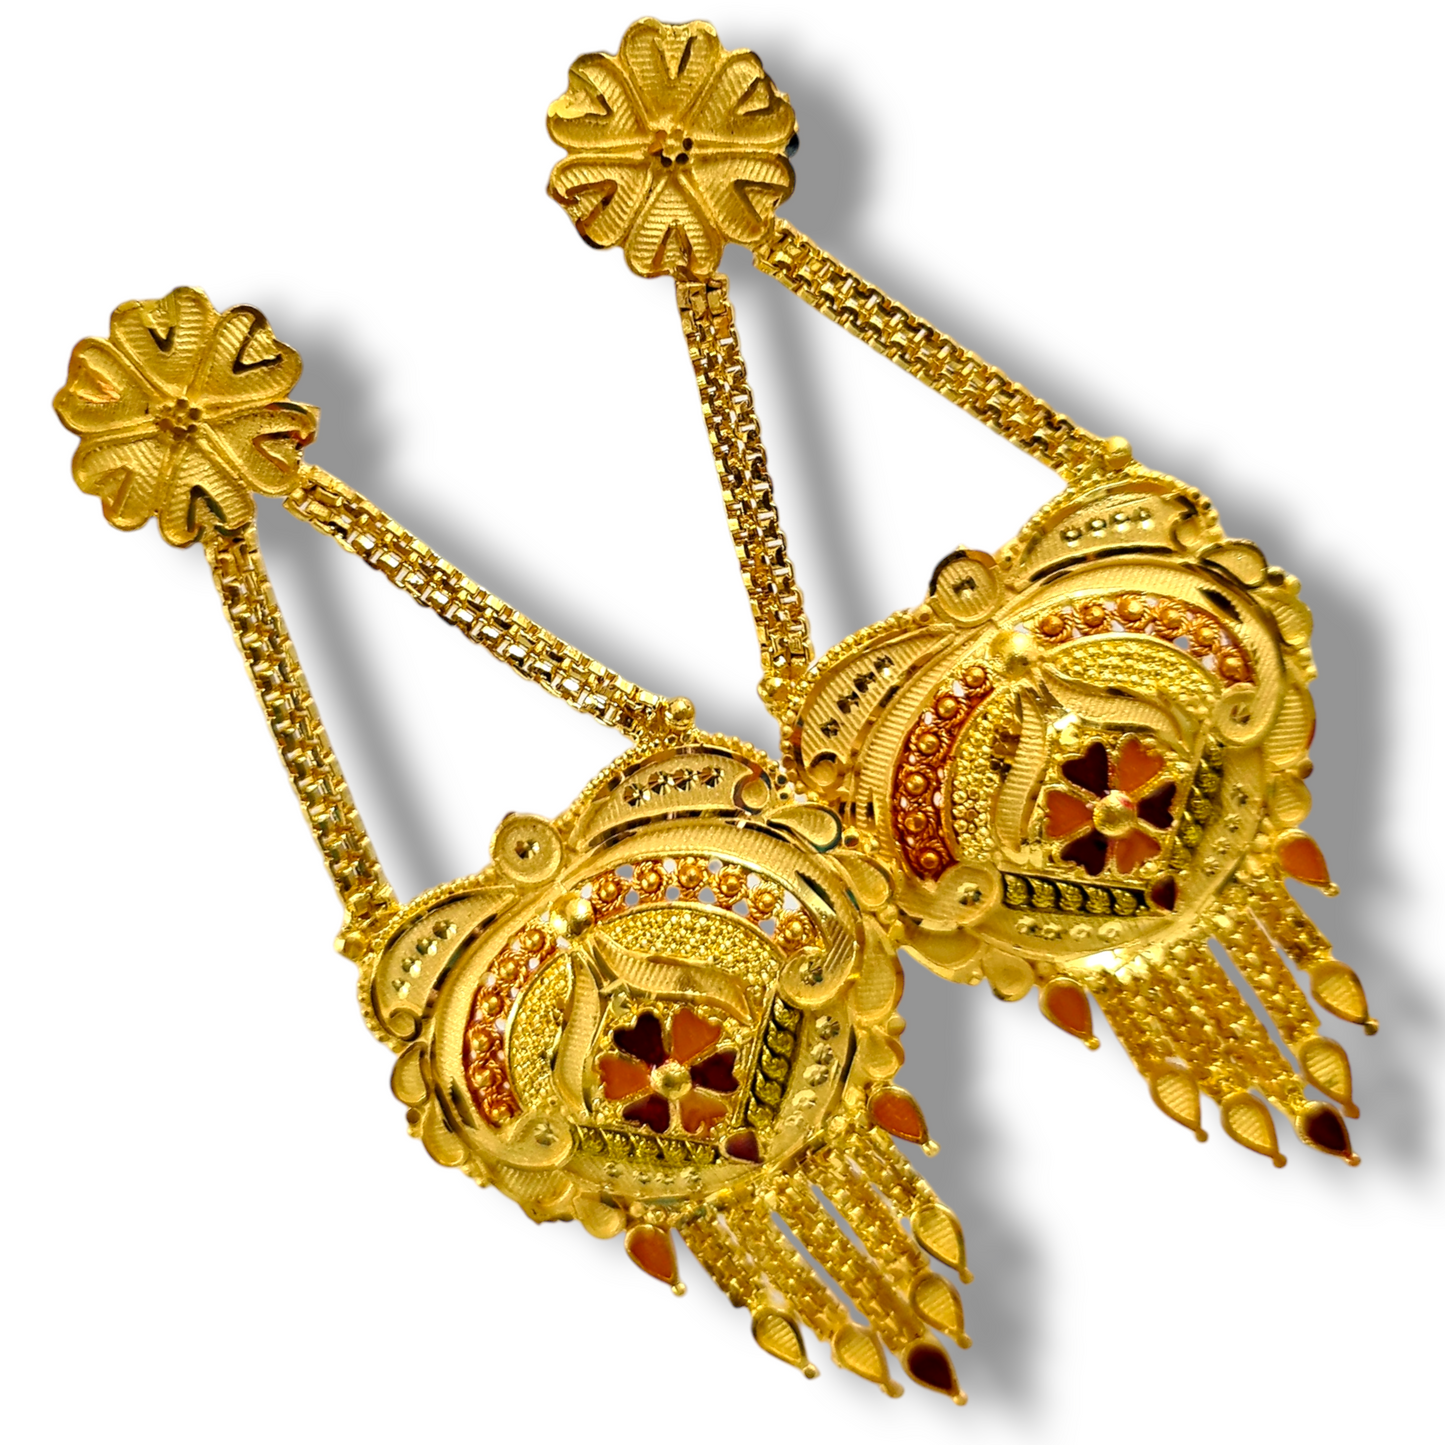 "Golden Touch: Handmade Earrings Adorned with Stunning Crystal"